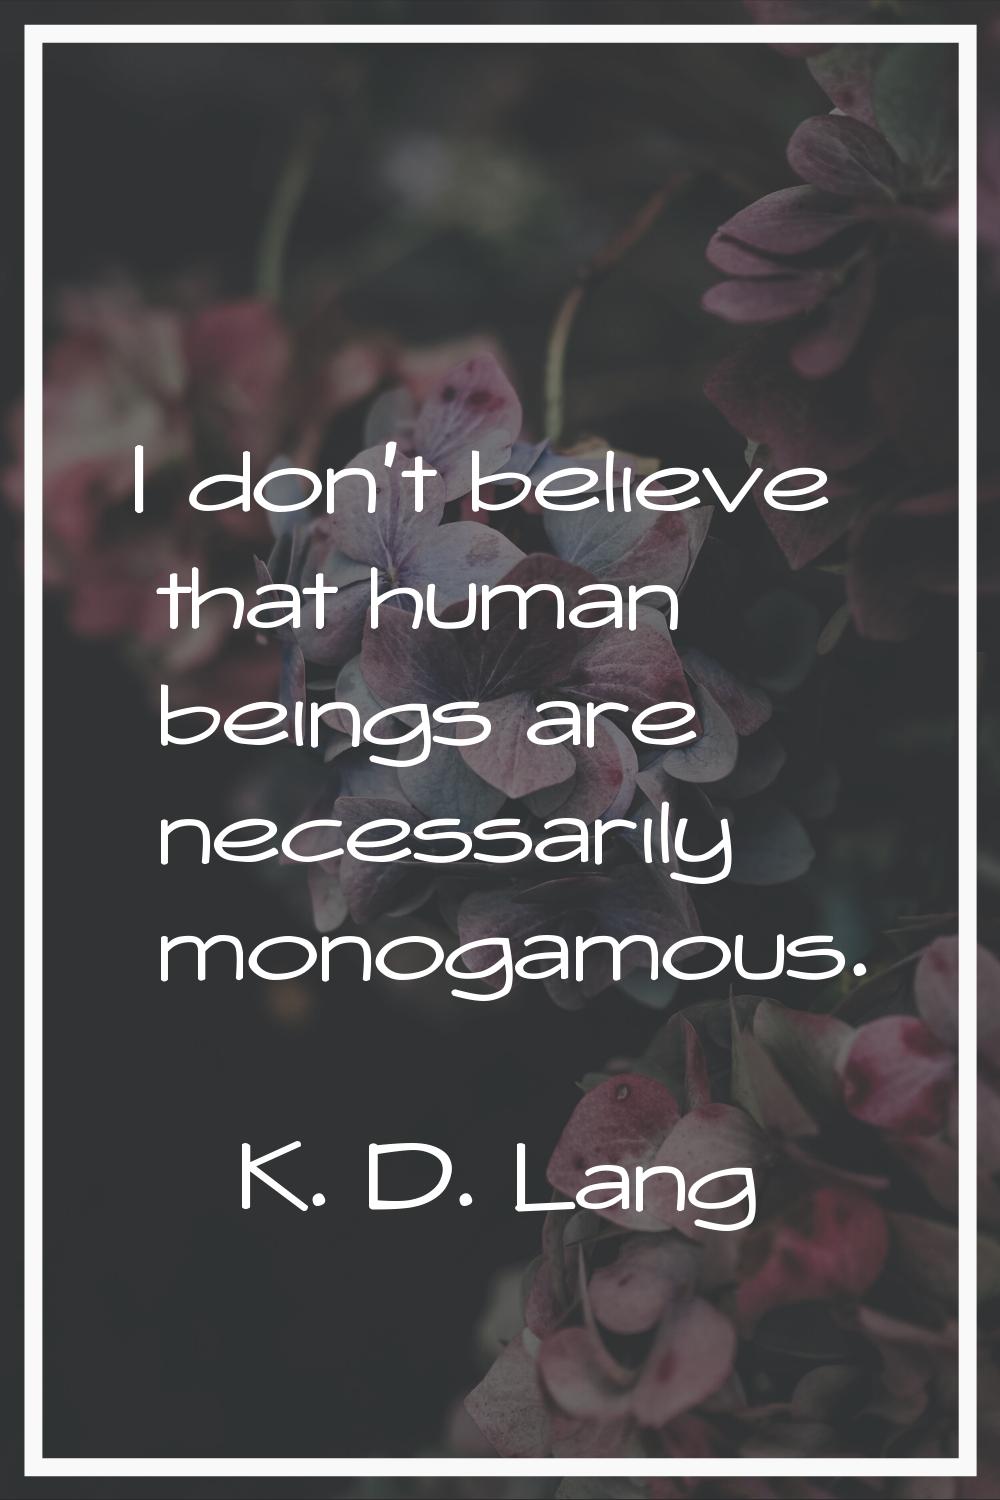 I don't believe that human beings are necessarily monogamous.